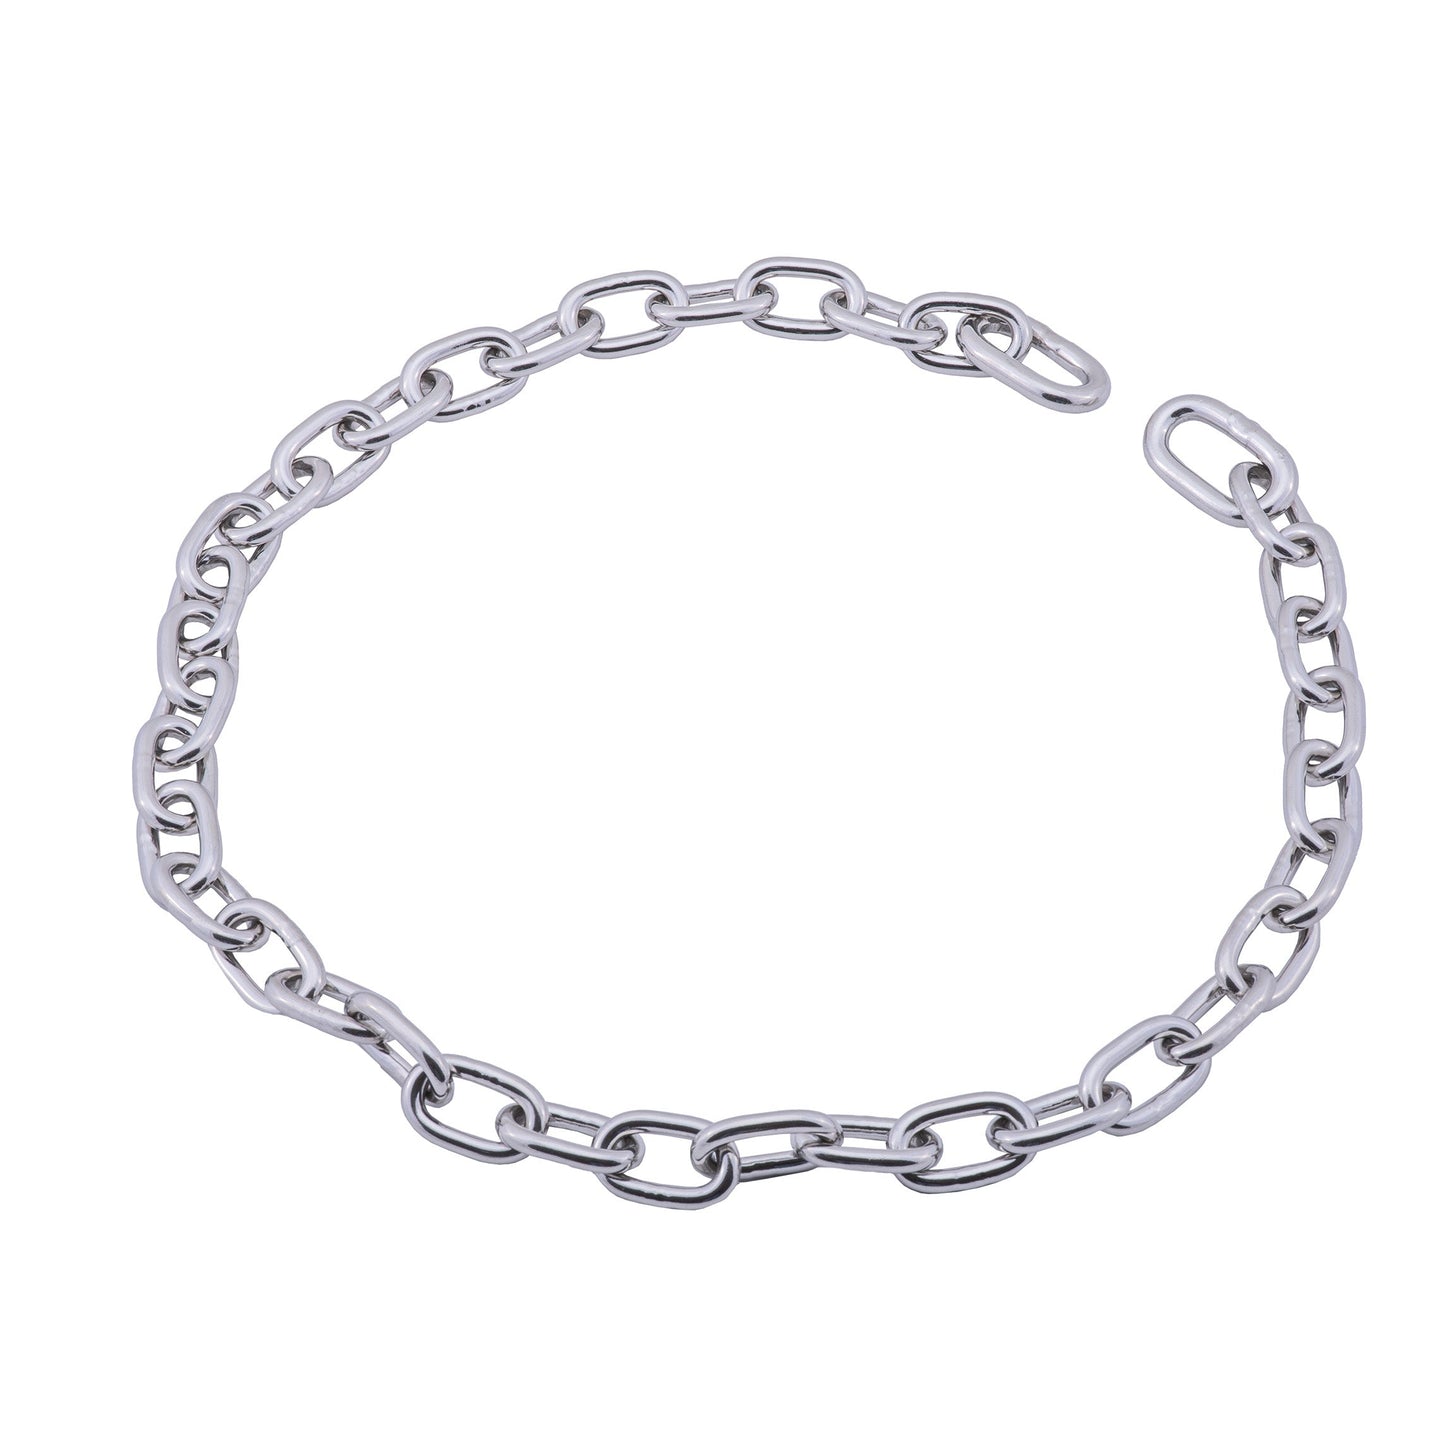 6' 316 Stainless Steel Anchor Chain